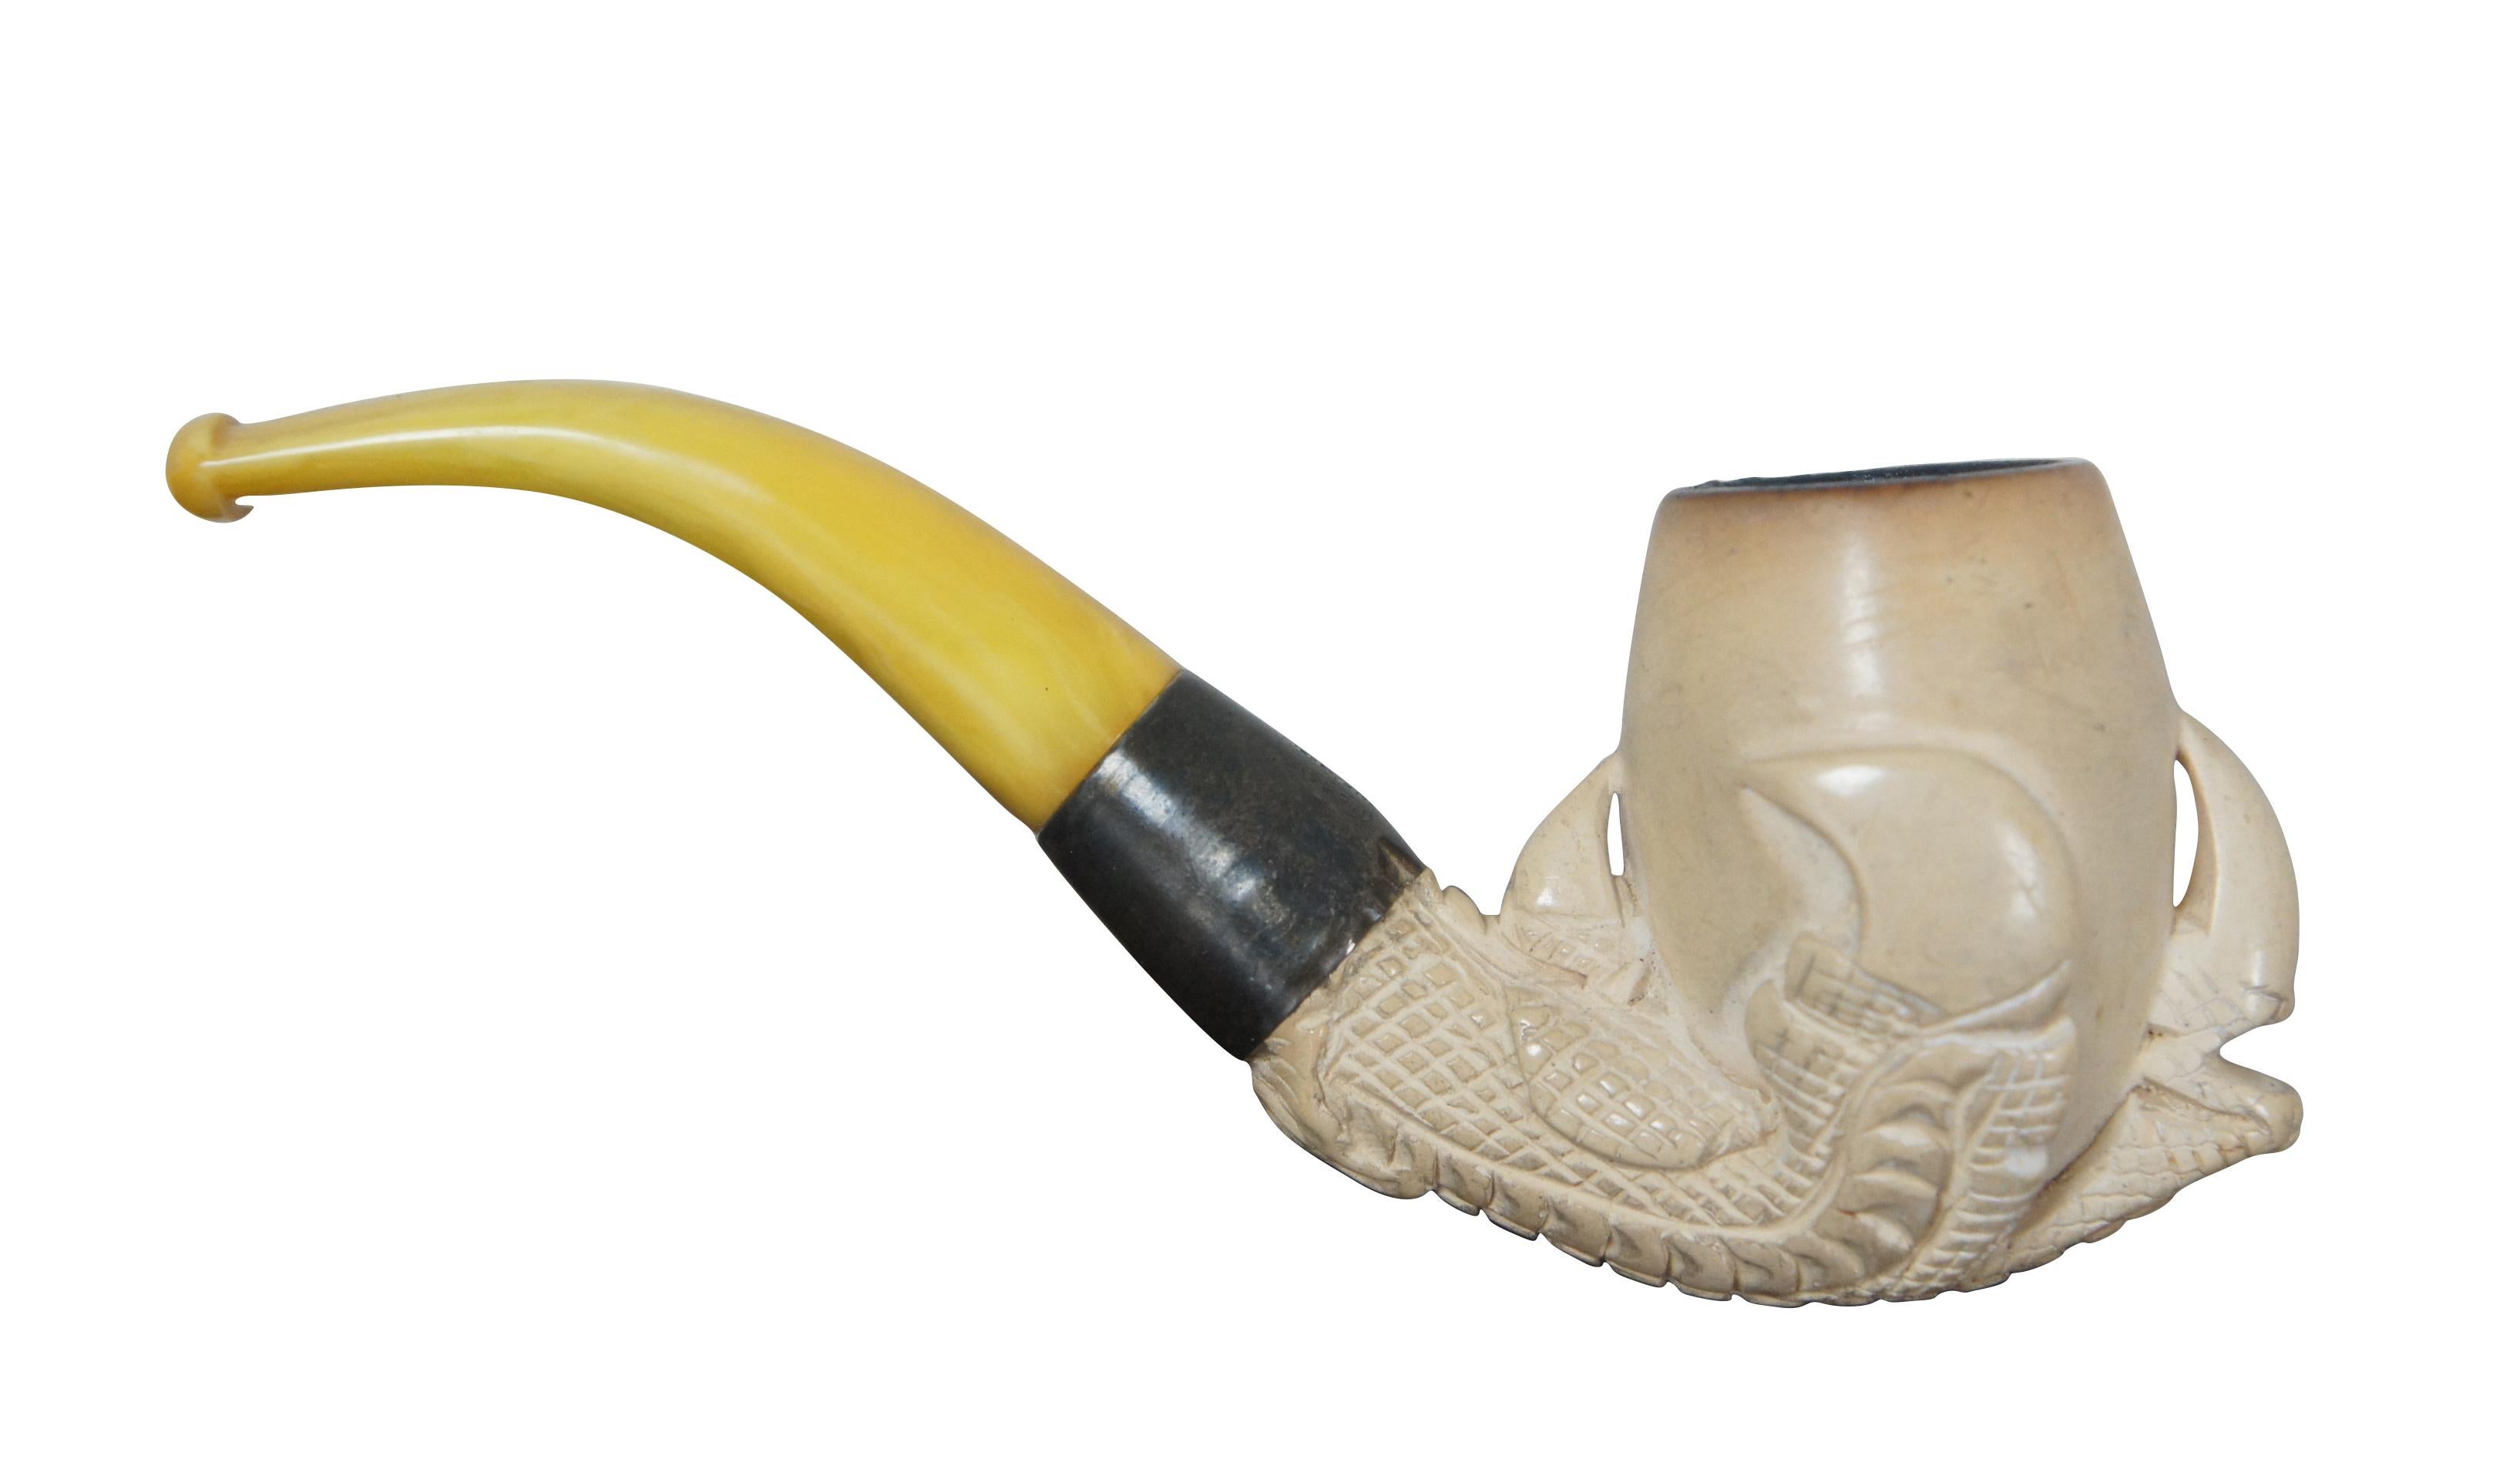 Antique meerschaum pipe with Bakelite and sterling handle. Features a dragon or eagle claw holding an egg. 

Measures: Pipe - 5” x 2” x 1.5” / Case - 5.5” x 2.5” x 2” (length x width x depth).